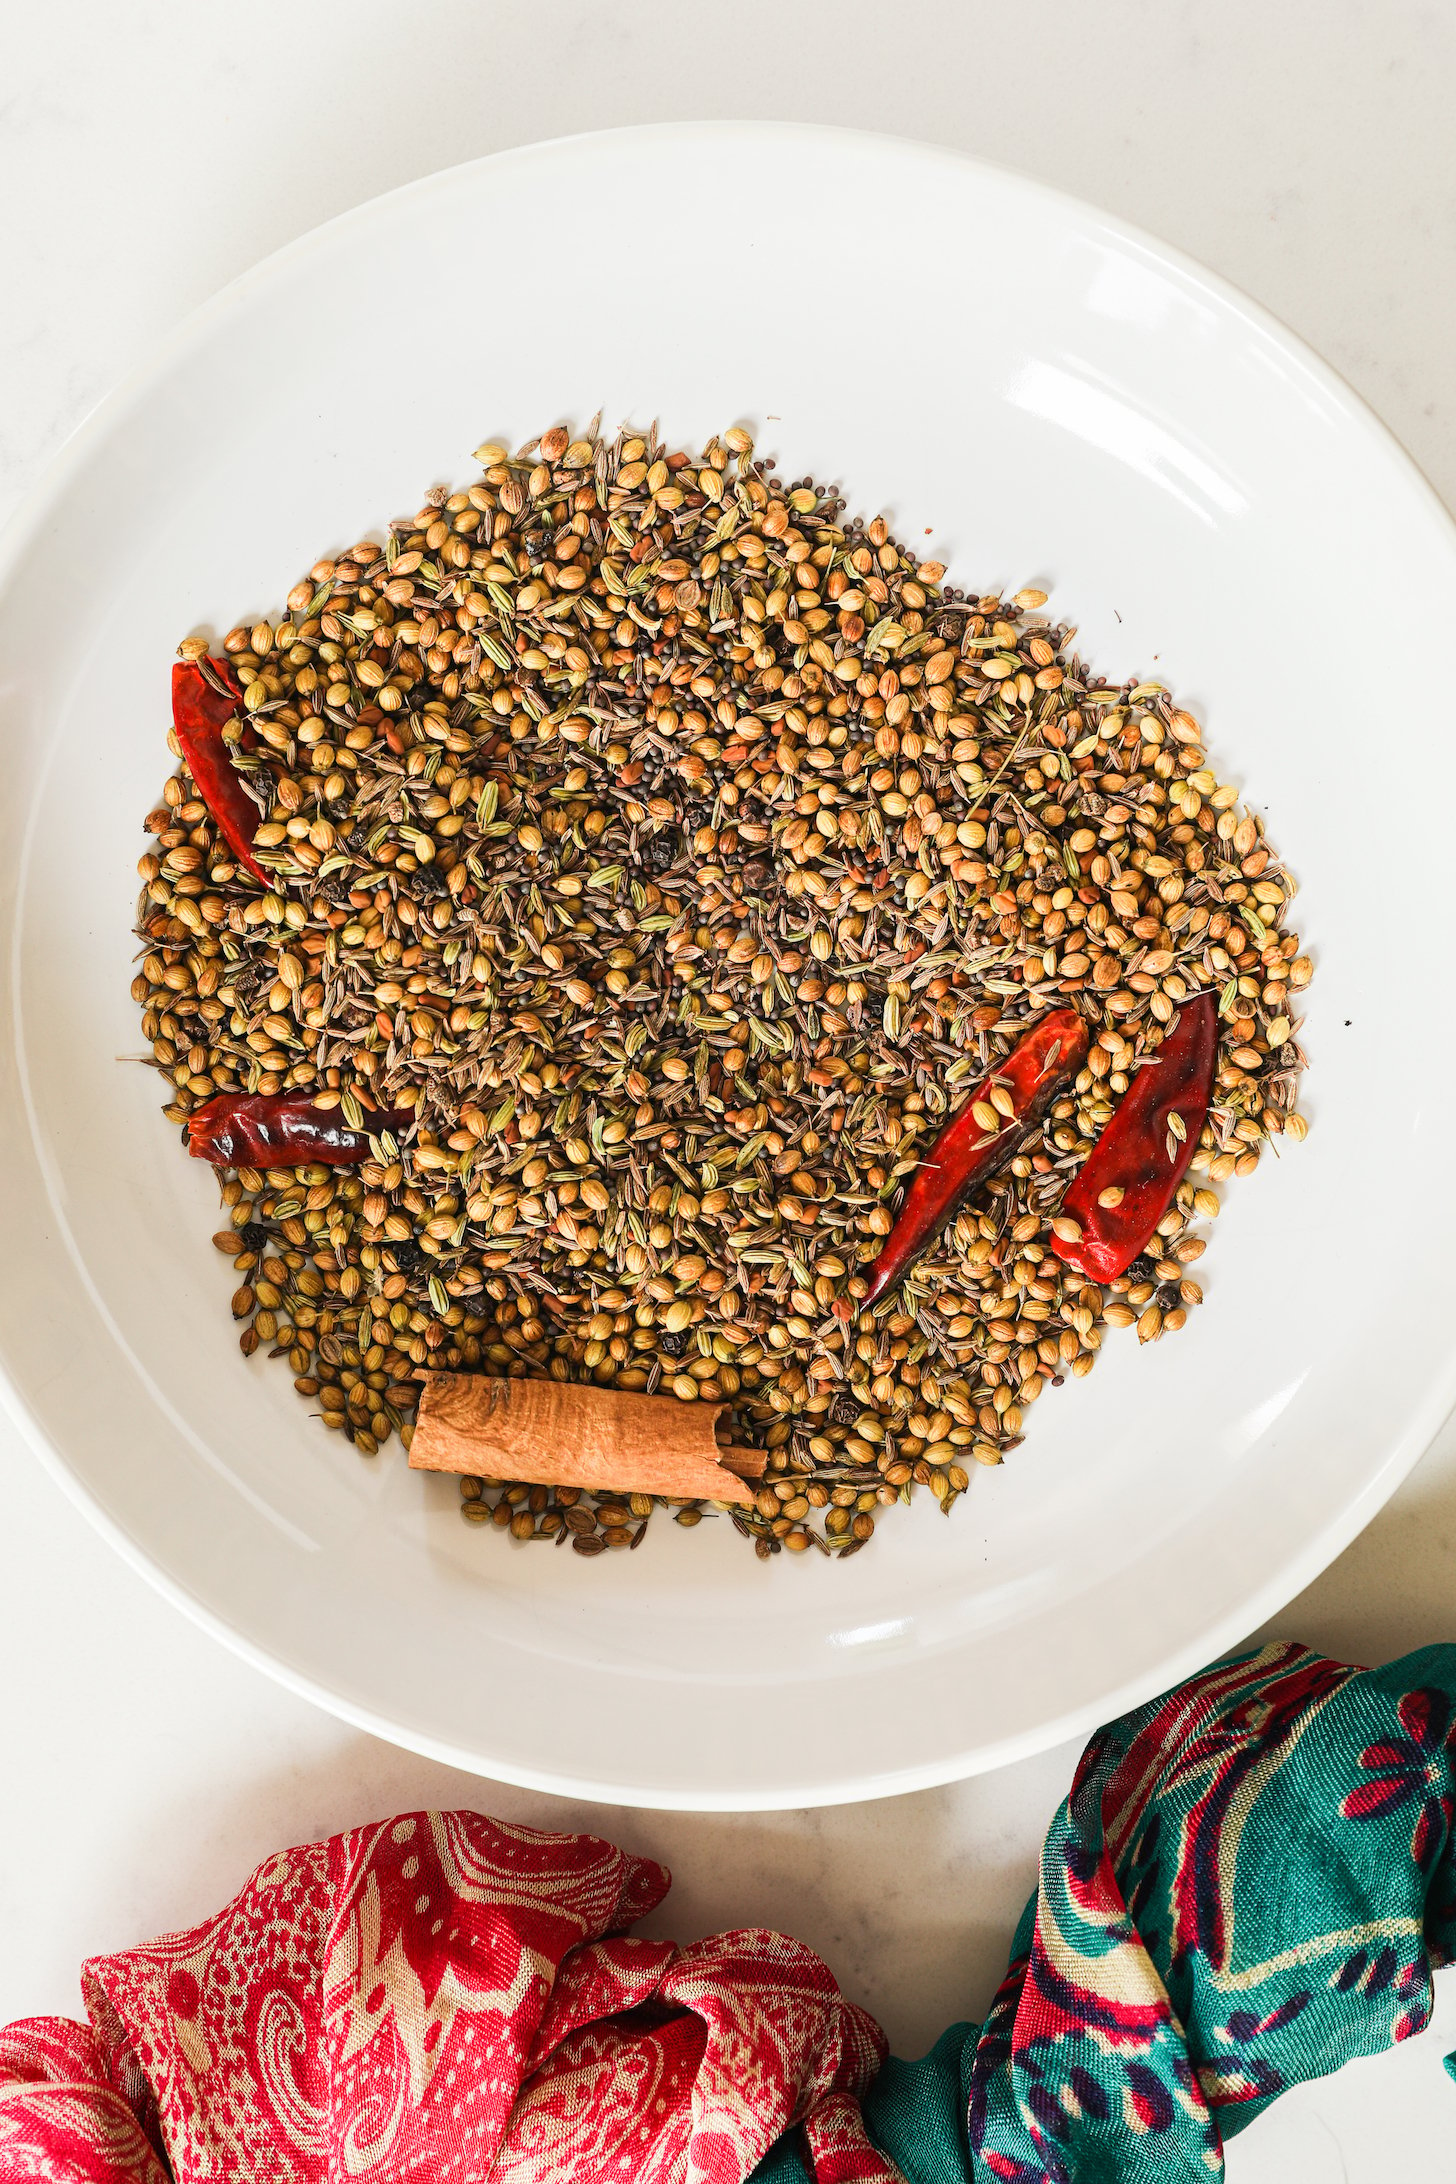 A bowl of traditional South Asian whole spices.